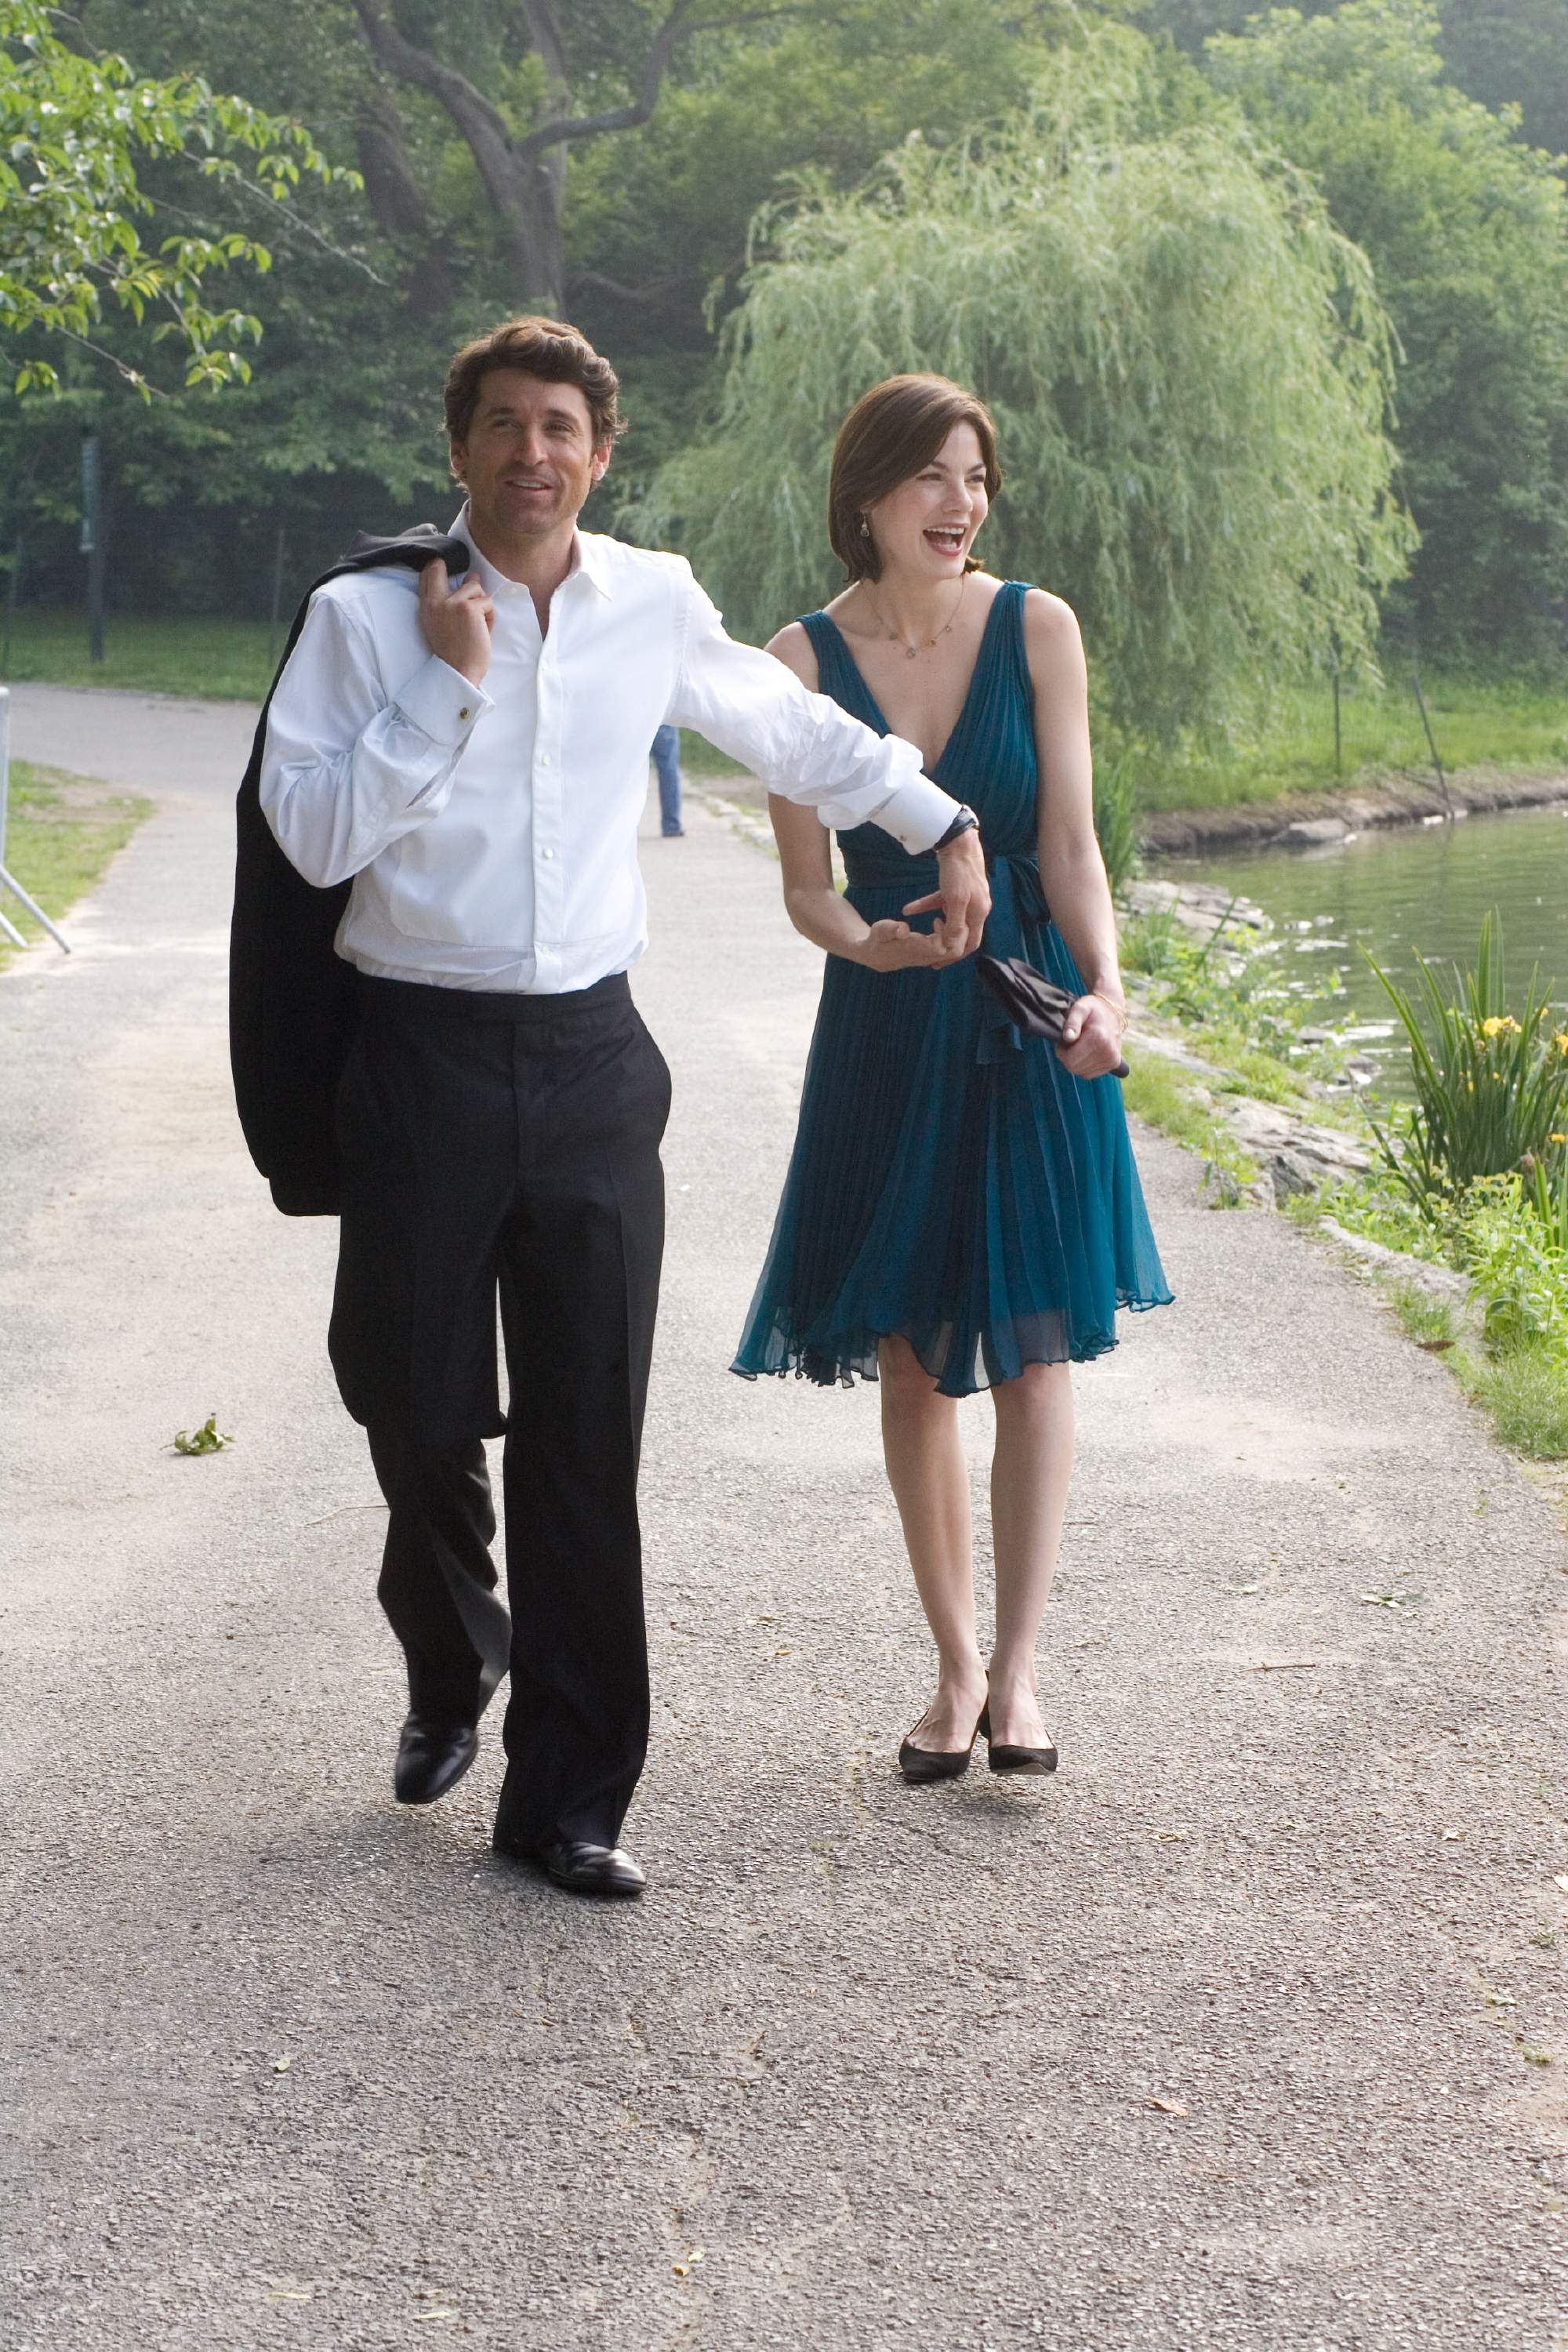 Patrick Dempsey as Tom and Michelle Monaghan as Hannah in Columbia Pictures' Made of Honor (2008). Photo credit: Peter Iovino.